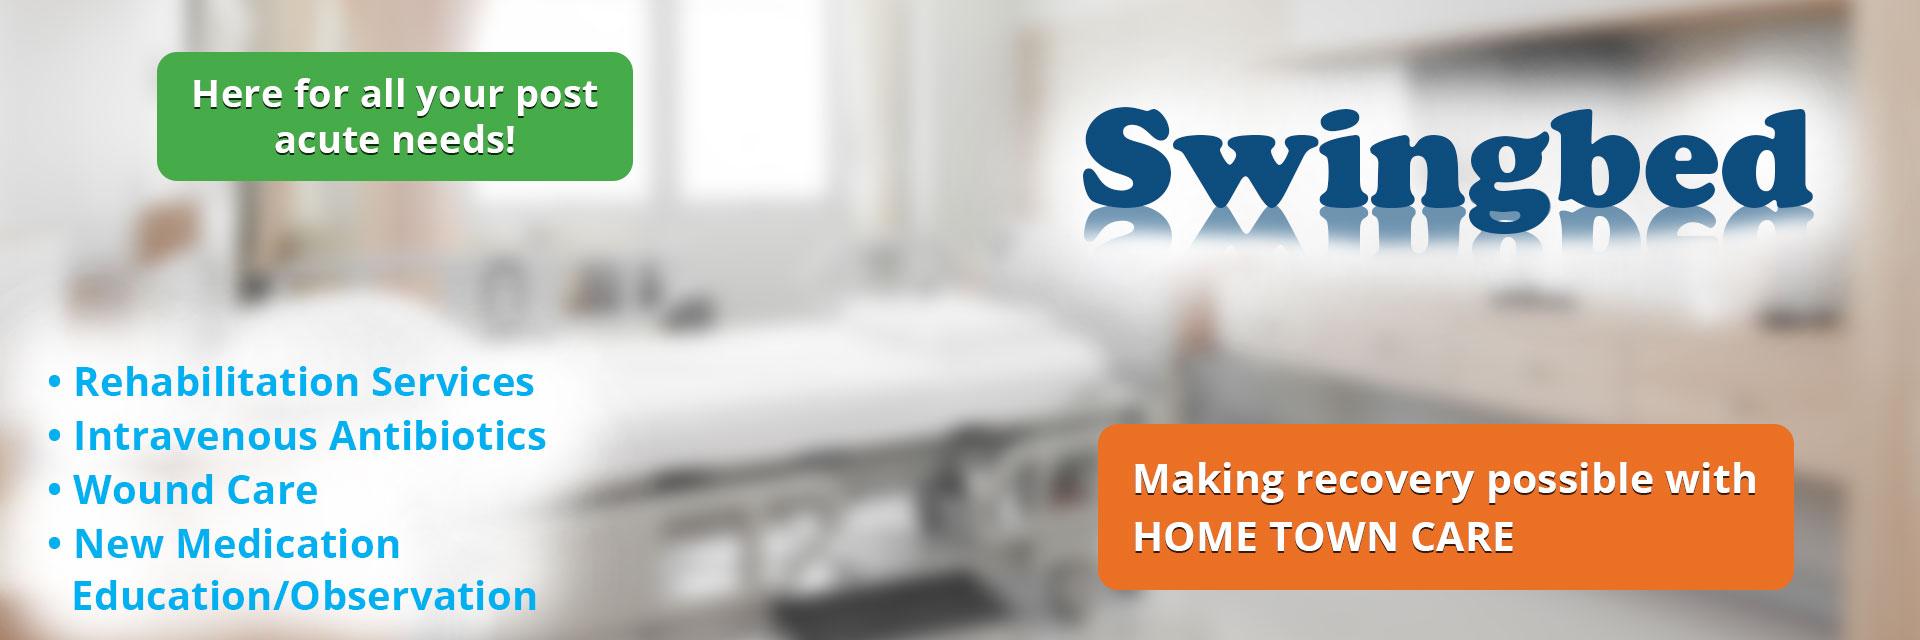 Banner picture of a background of a swingbed. Banner says:

Swingbed

Here for all your post acute needs!

* Rehabilitation Services
* Intravenous Antibiotics
* Wound Care
* New Medication Education/Observation

Making recovery possible with HOME TOWN CARE